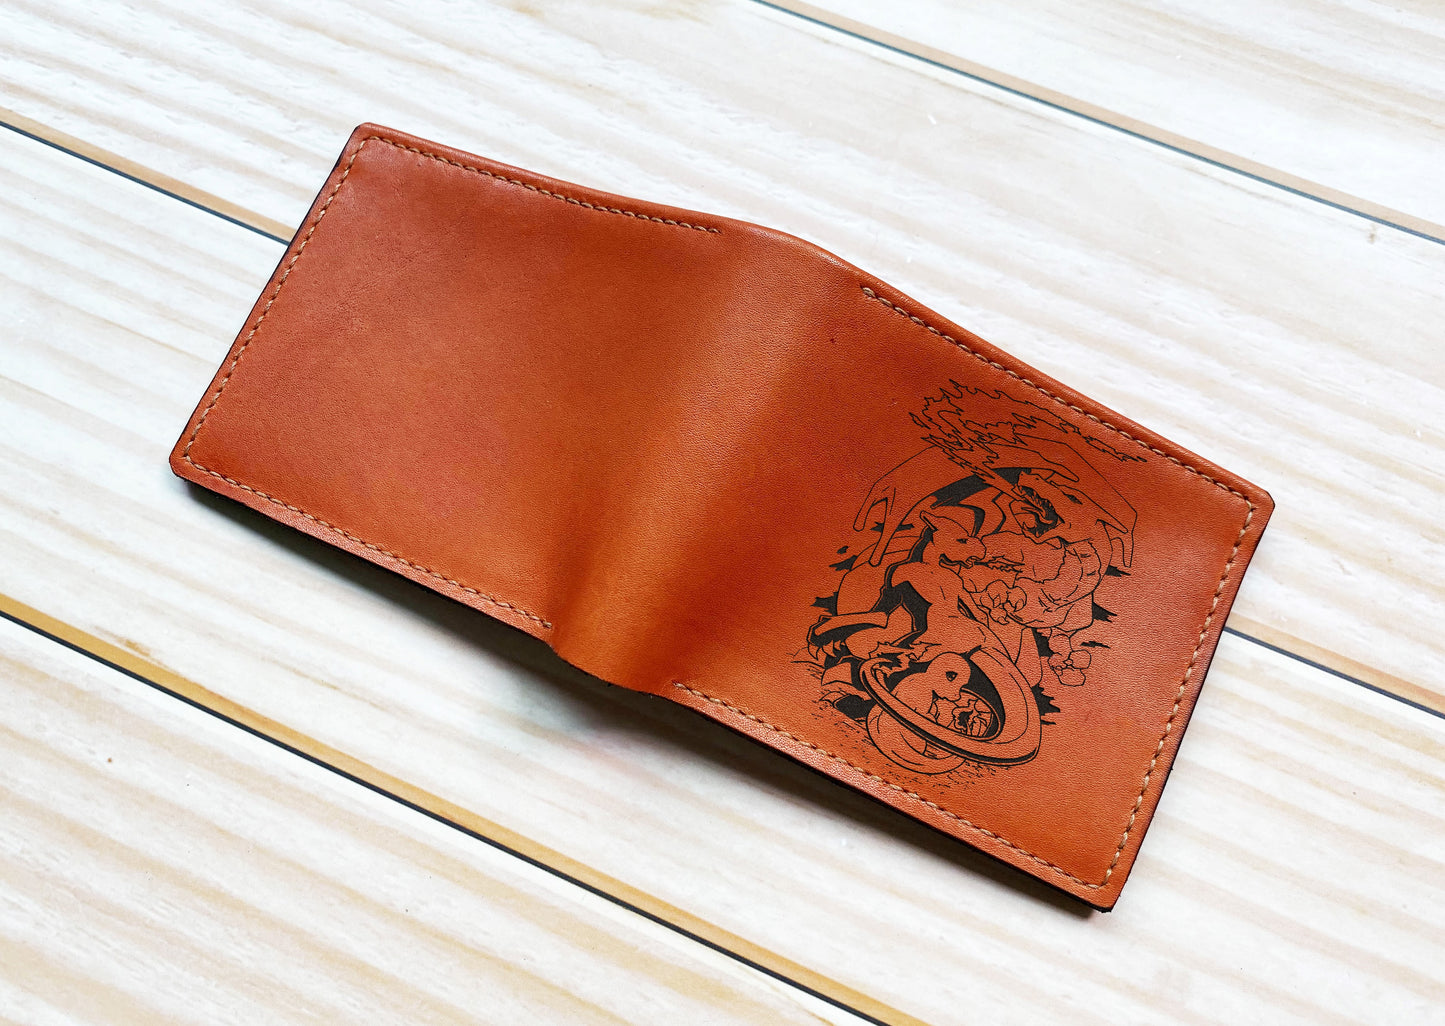 Charizard Chamander pokemon art leather wallet, personalized leather gift ideas, bifold genuine leather wallet, gift for him